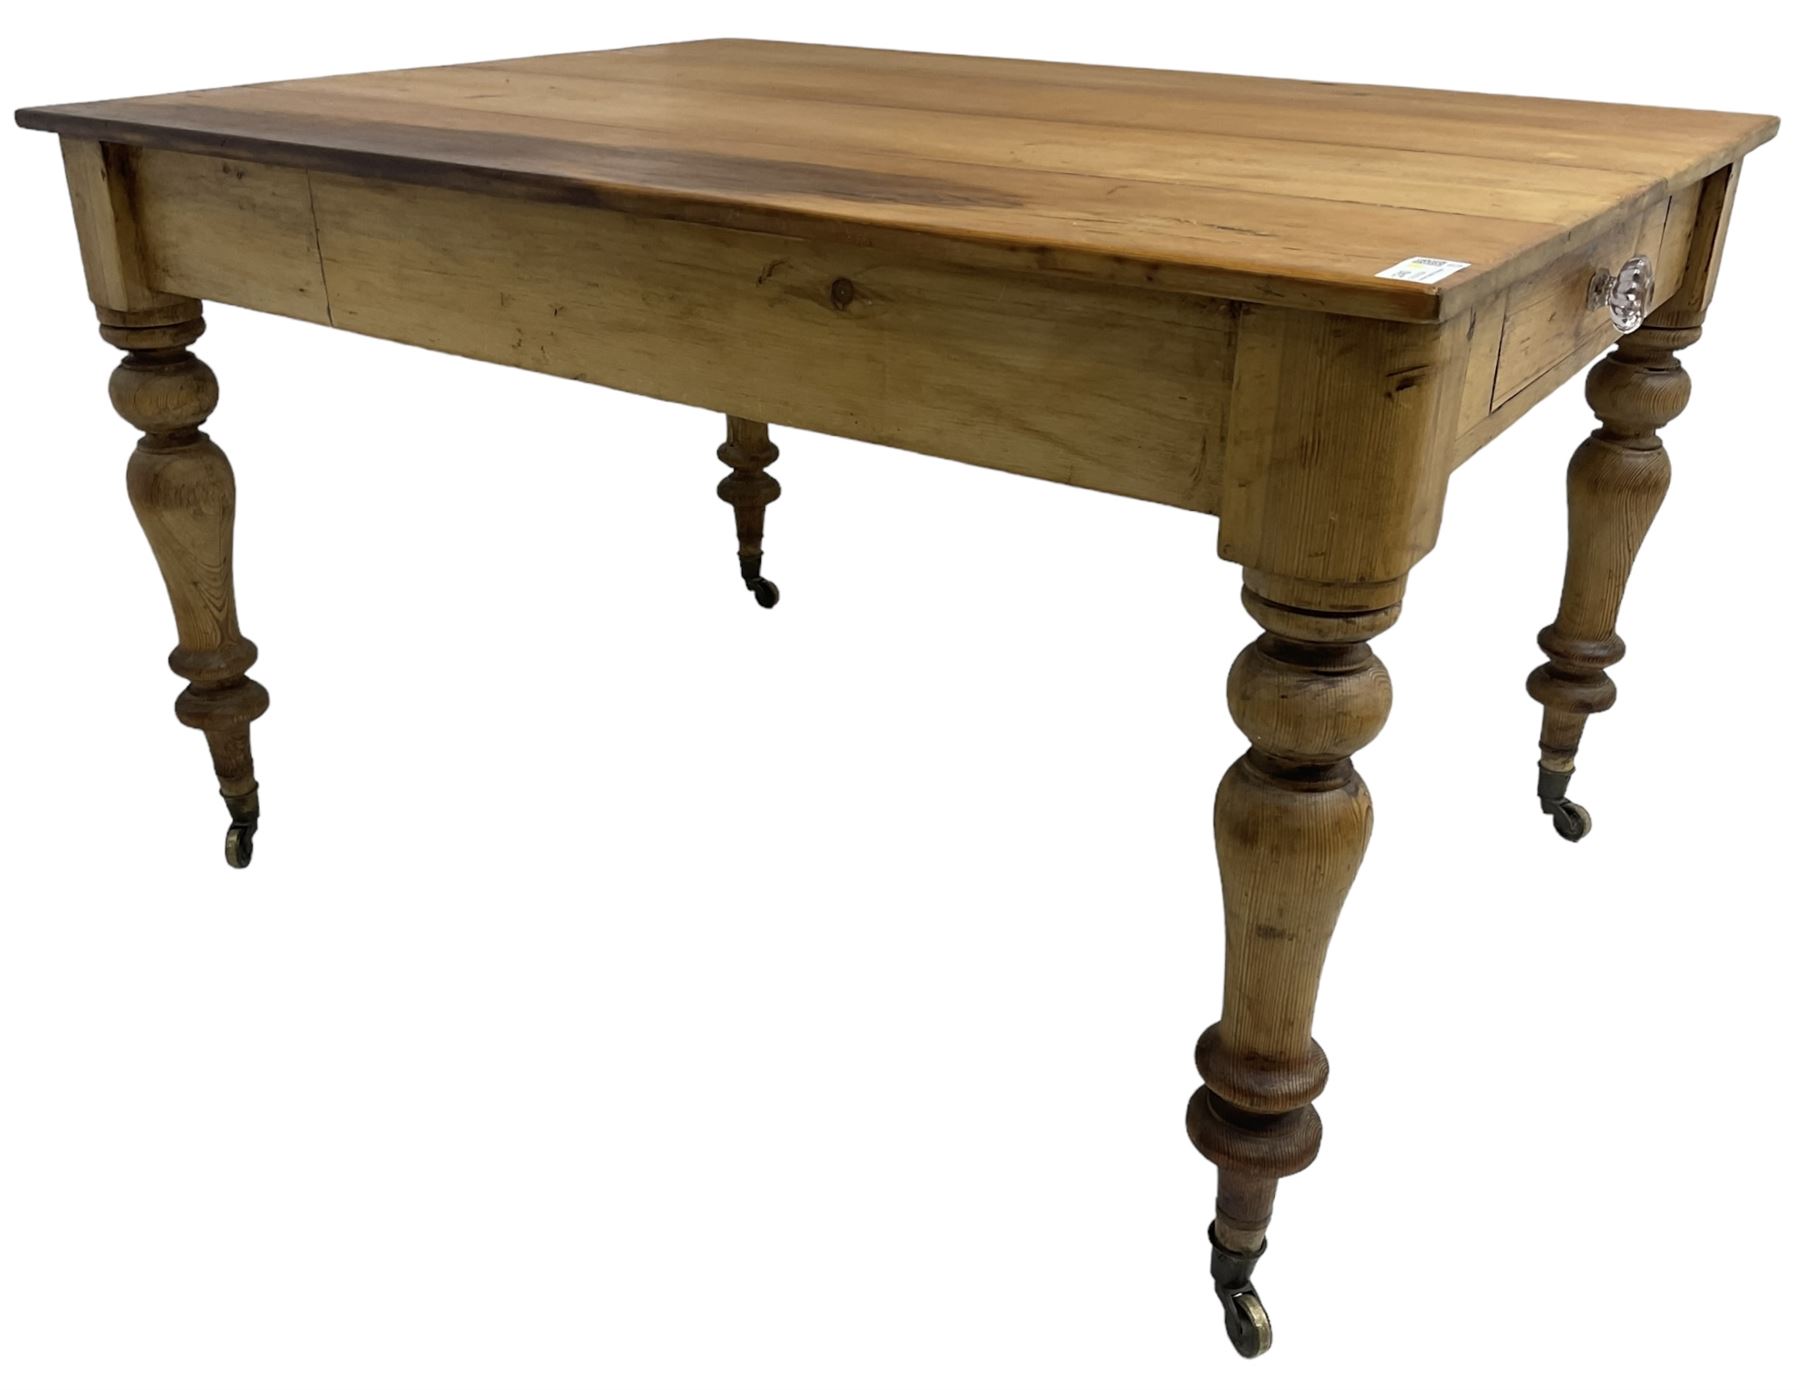 Victorian pine farmhouse kitchen dining table - Image 3 of 8